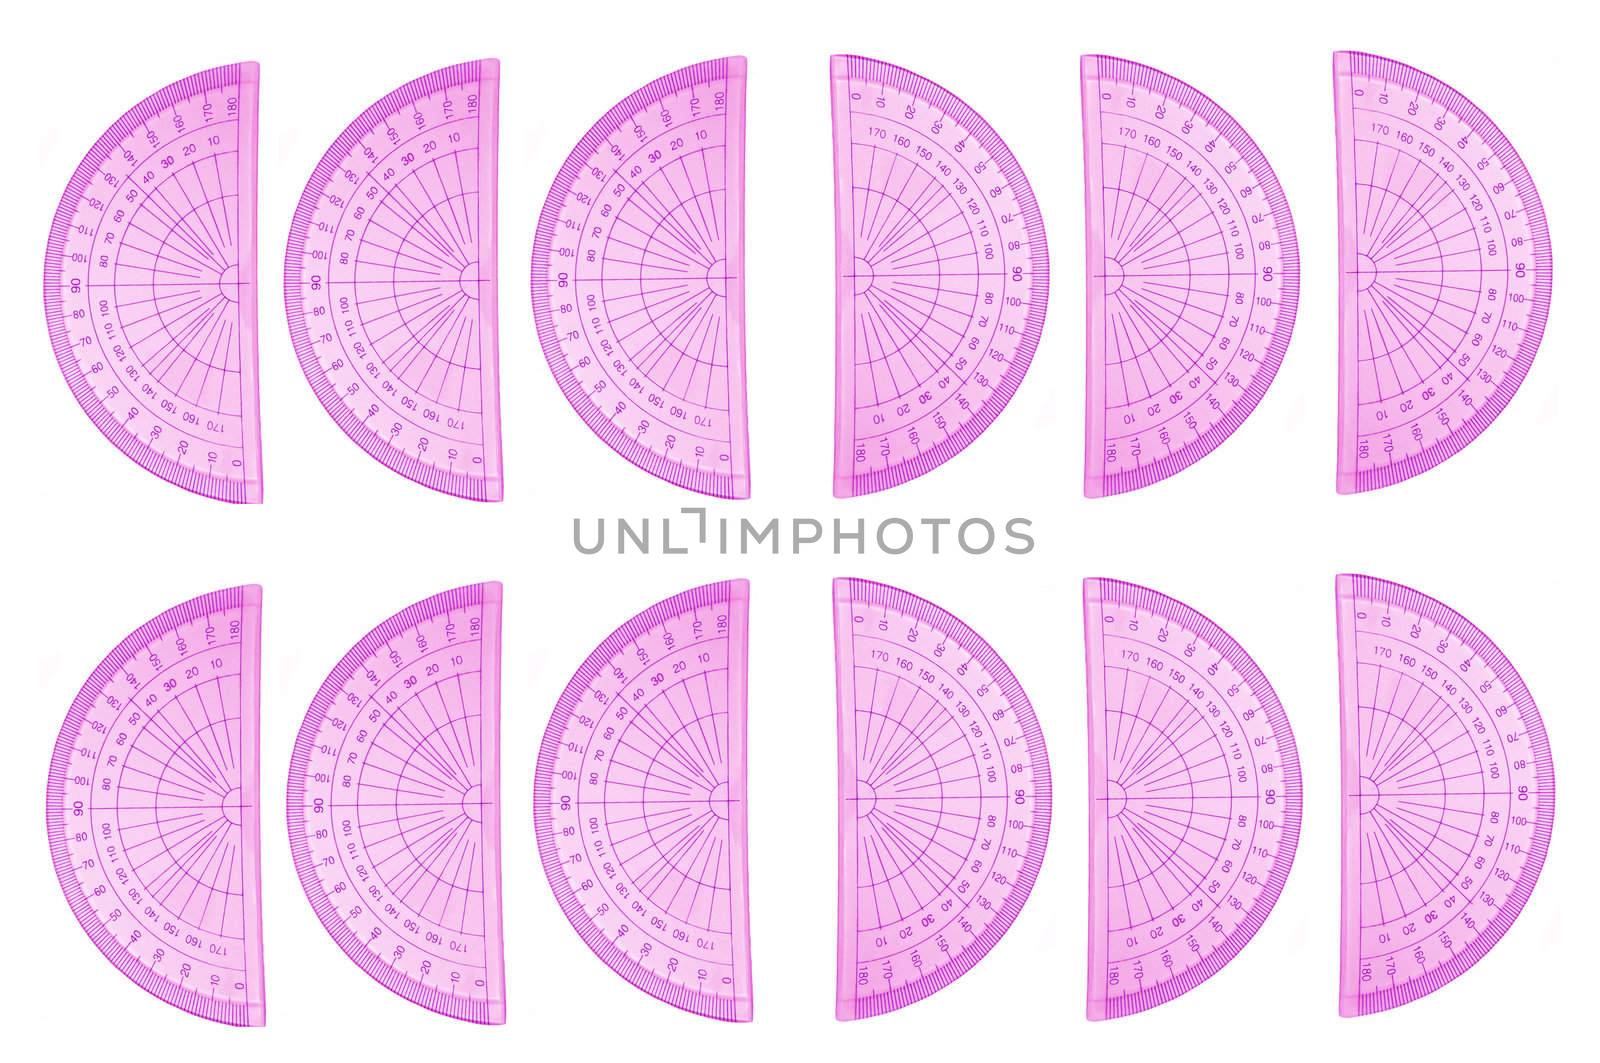 Background protractors by 72soul